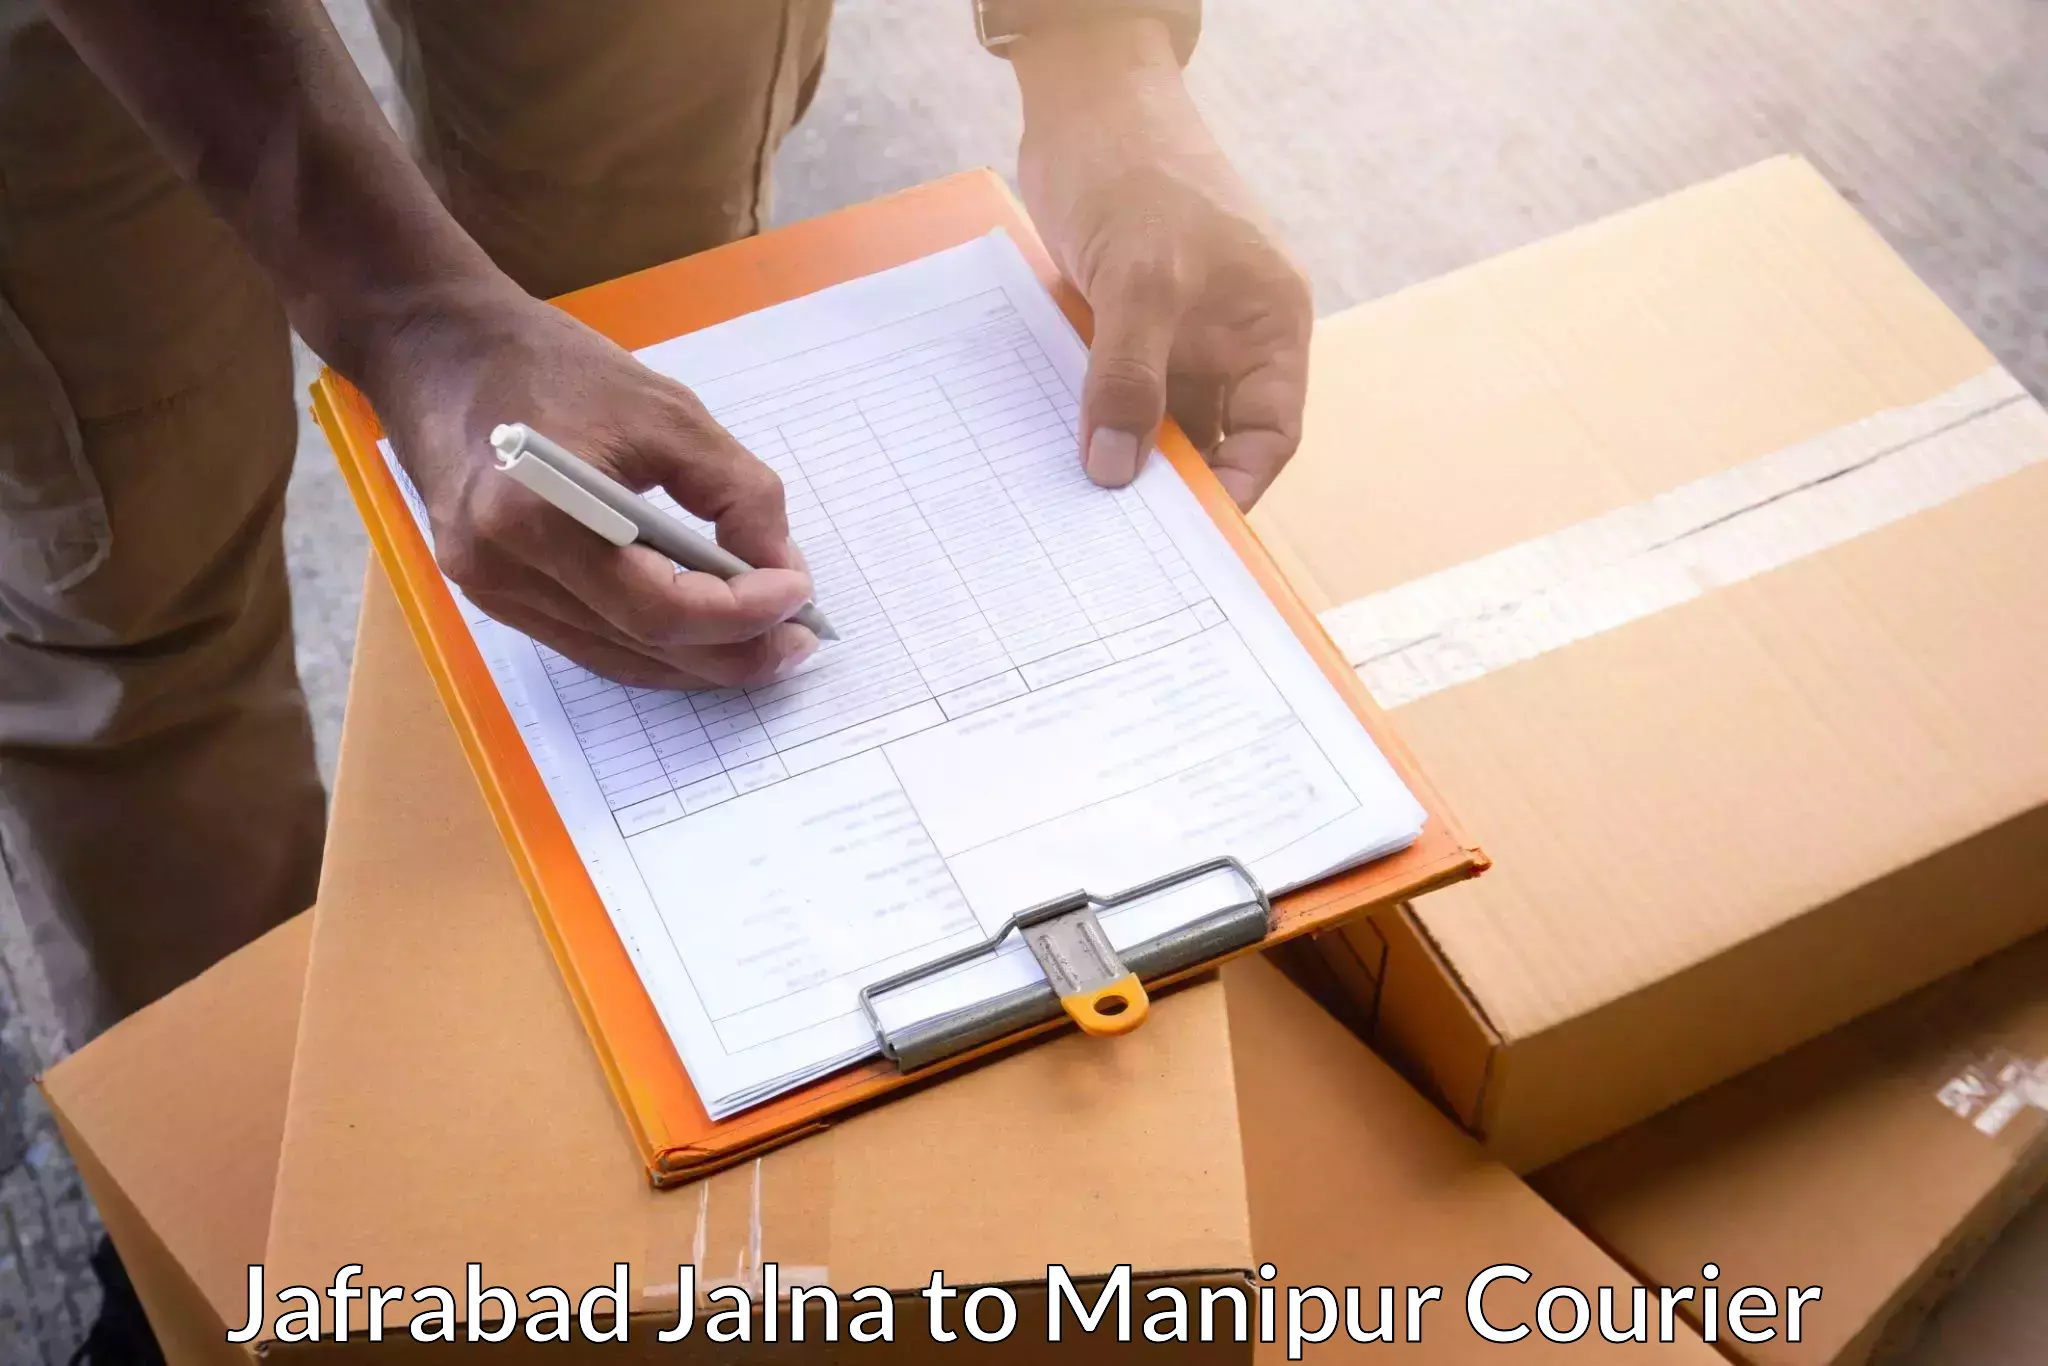 Custom courier packaging Jafrabad Jalna to Manipur